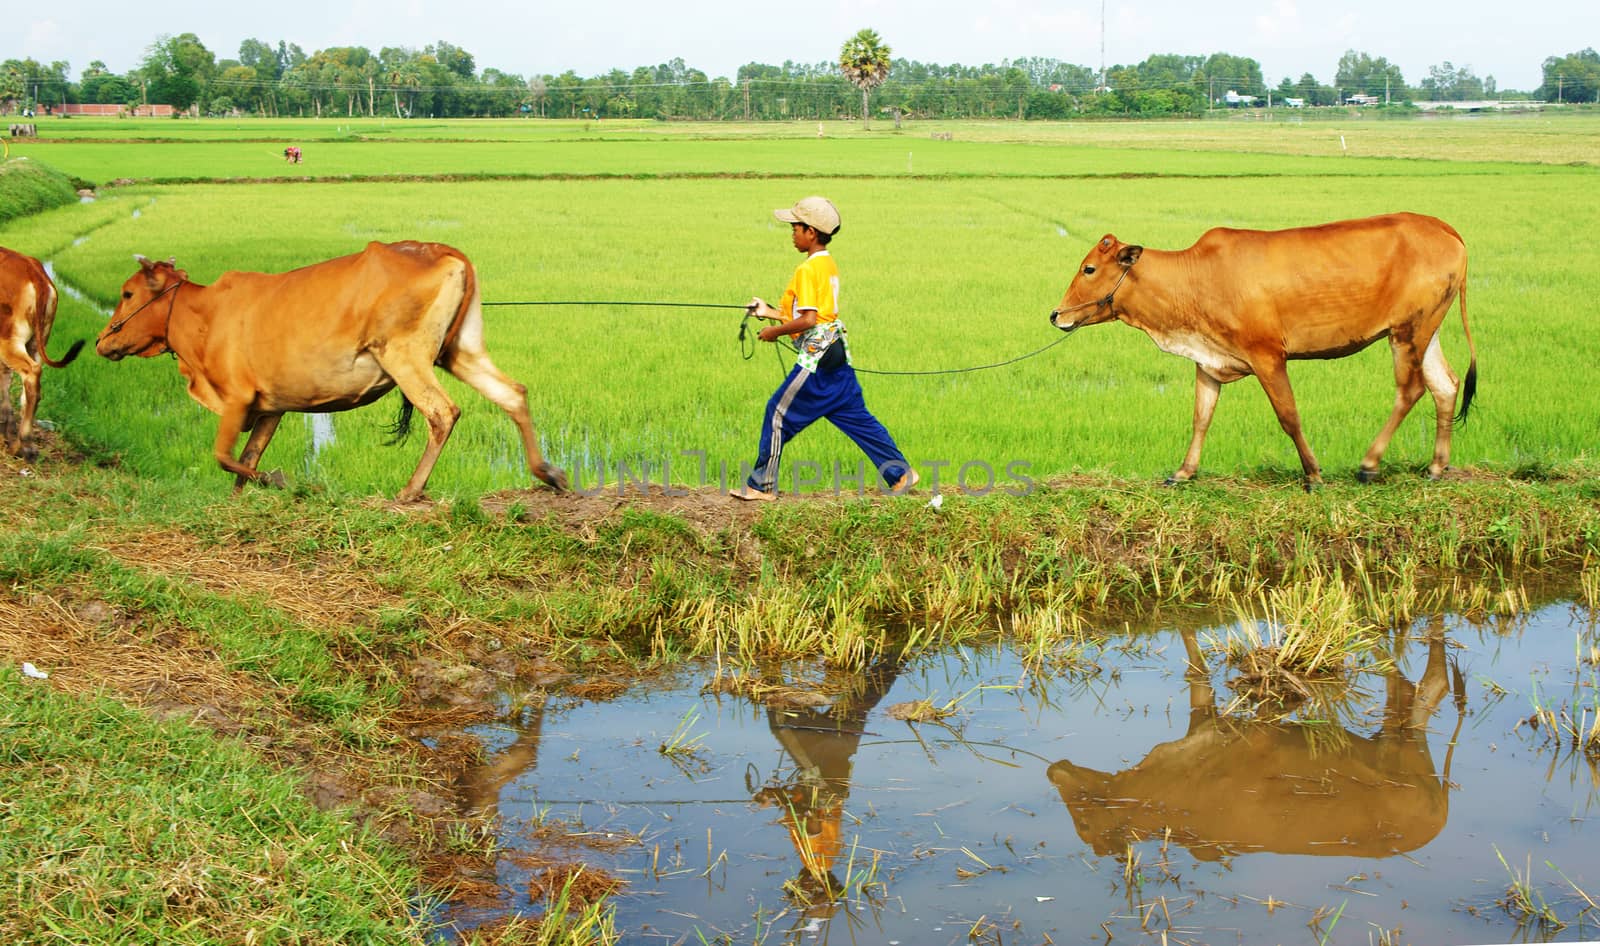 MEKONG DELTA, VIET NAM- SEPT 20: Unodentified Asian child labor tend cow on rice plantation, ox, boy reflect on water, children work at Vietnamese poor countryside, Vietnam, Sept 20, 2014